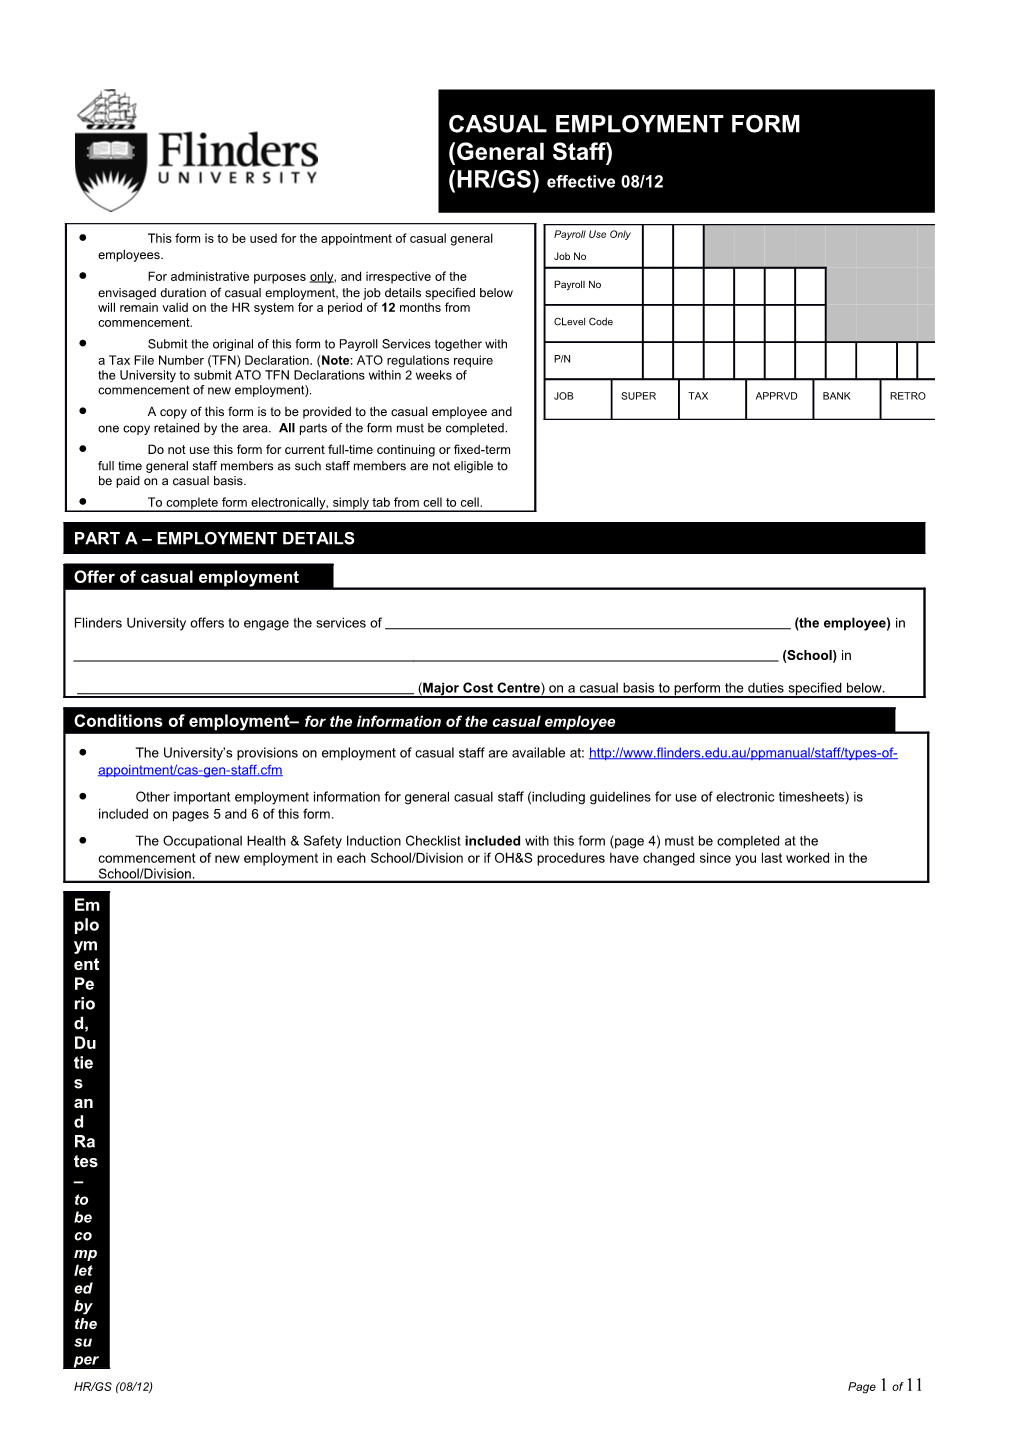 This Form Is to Be Used for the Appointment of Casual General Employees